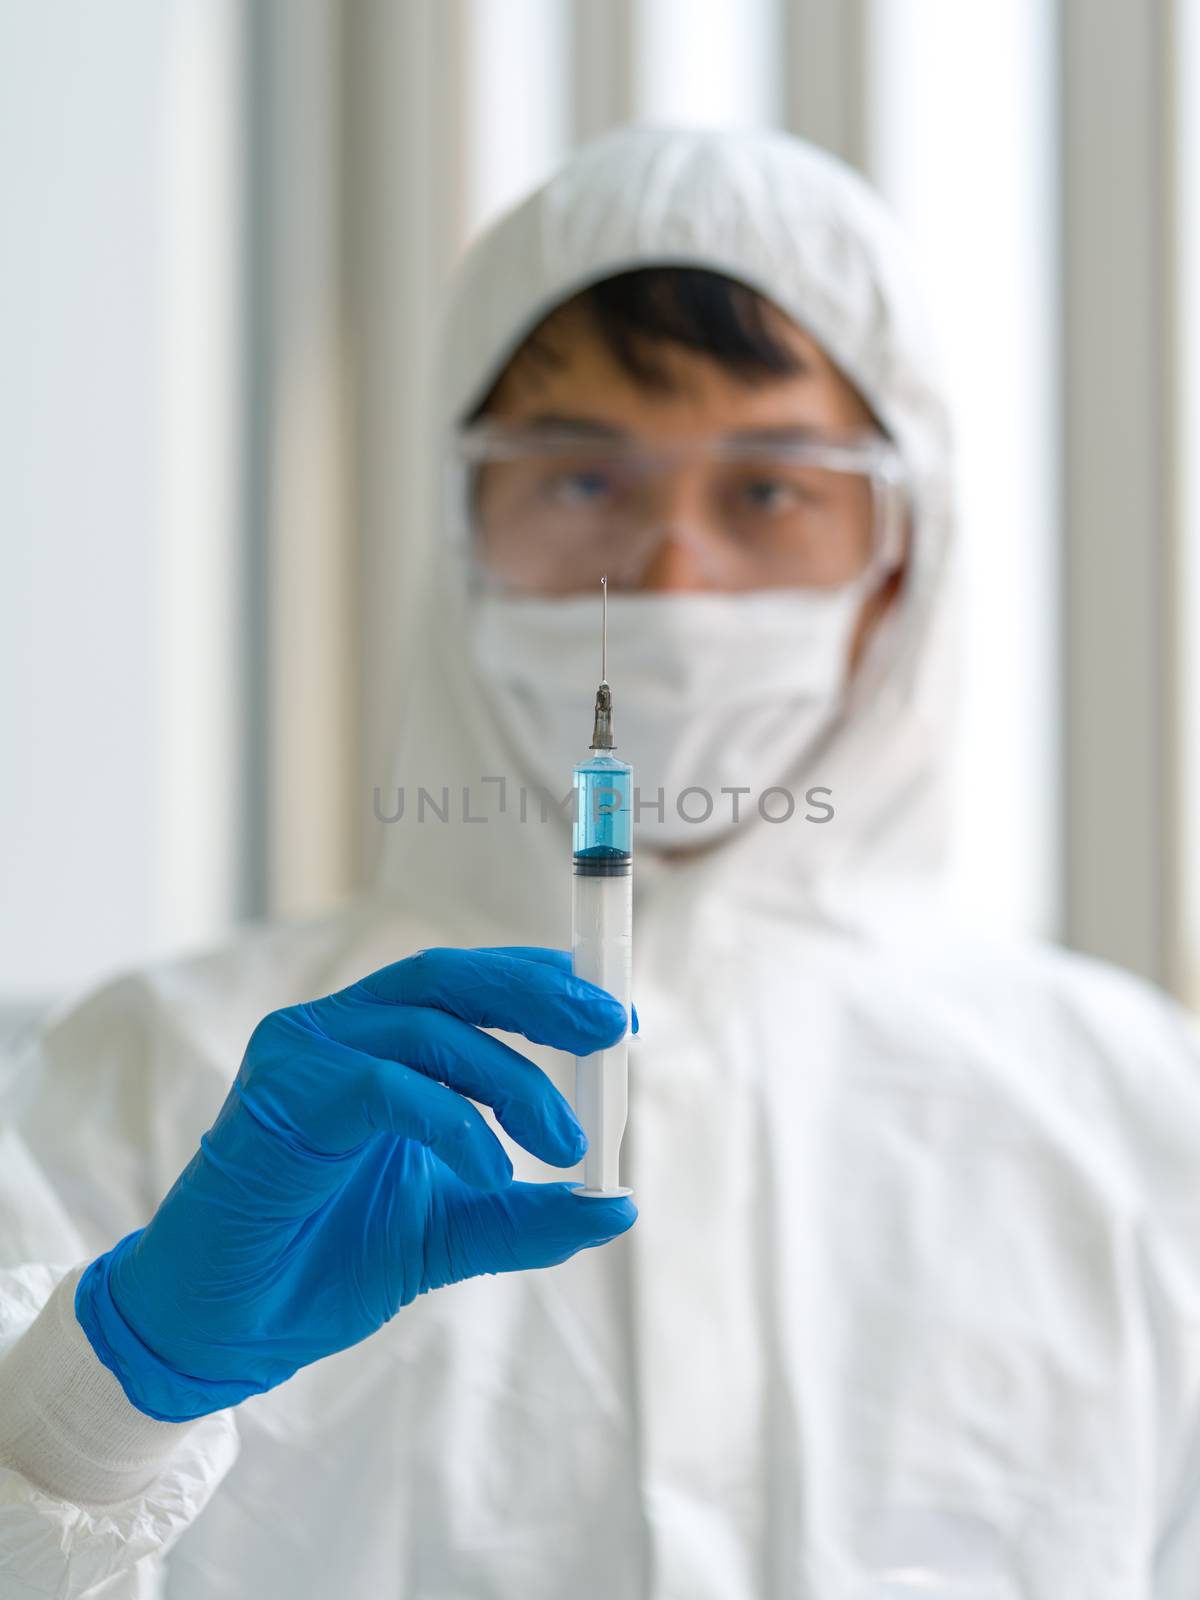 A syringe containing a blue anti-virus drug in the hands of researchers. Coronavirus disease 2019 testing process in a laboratory.